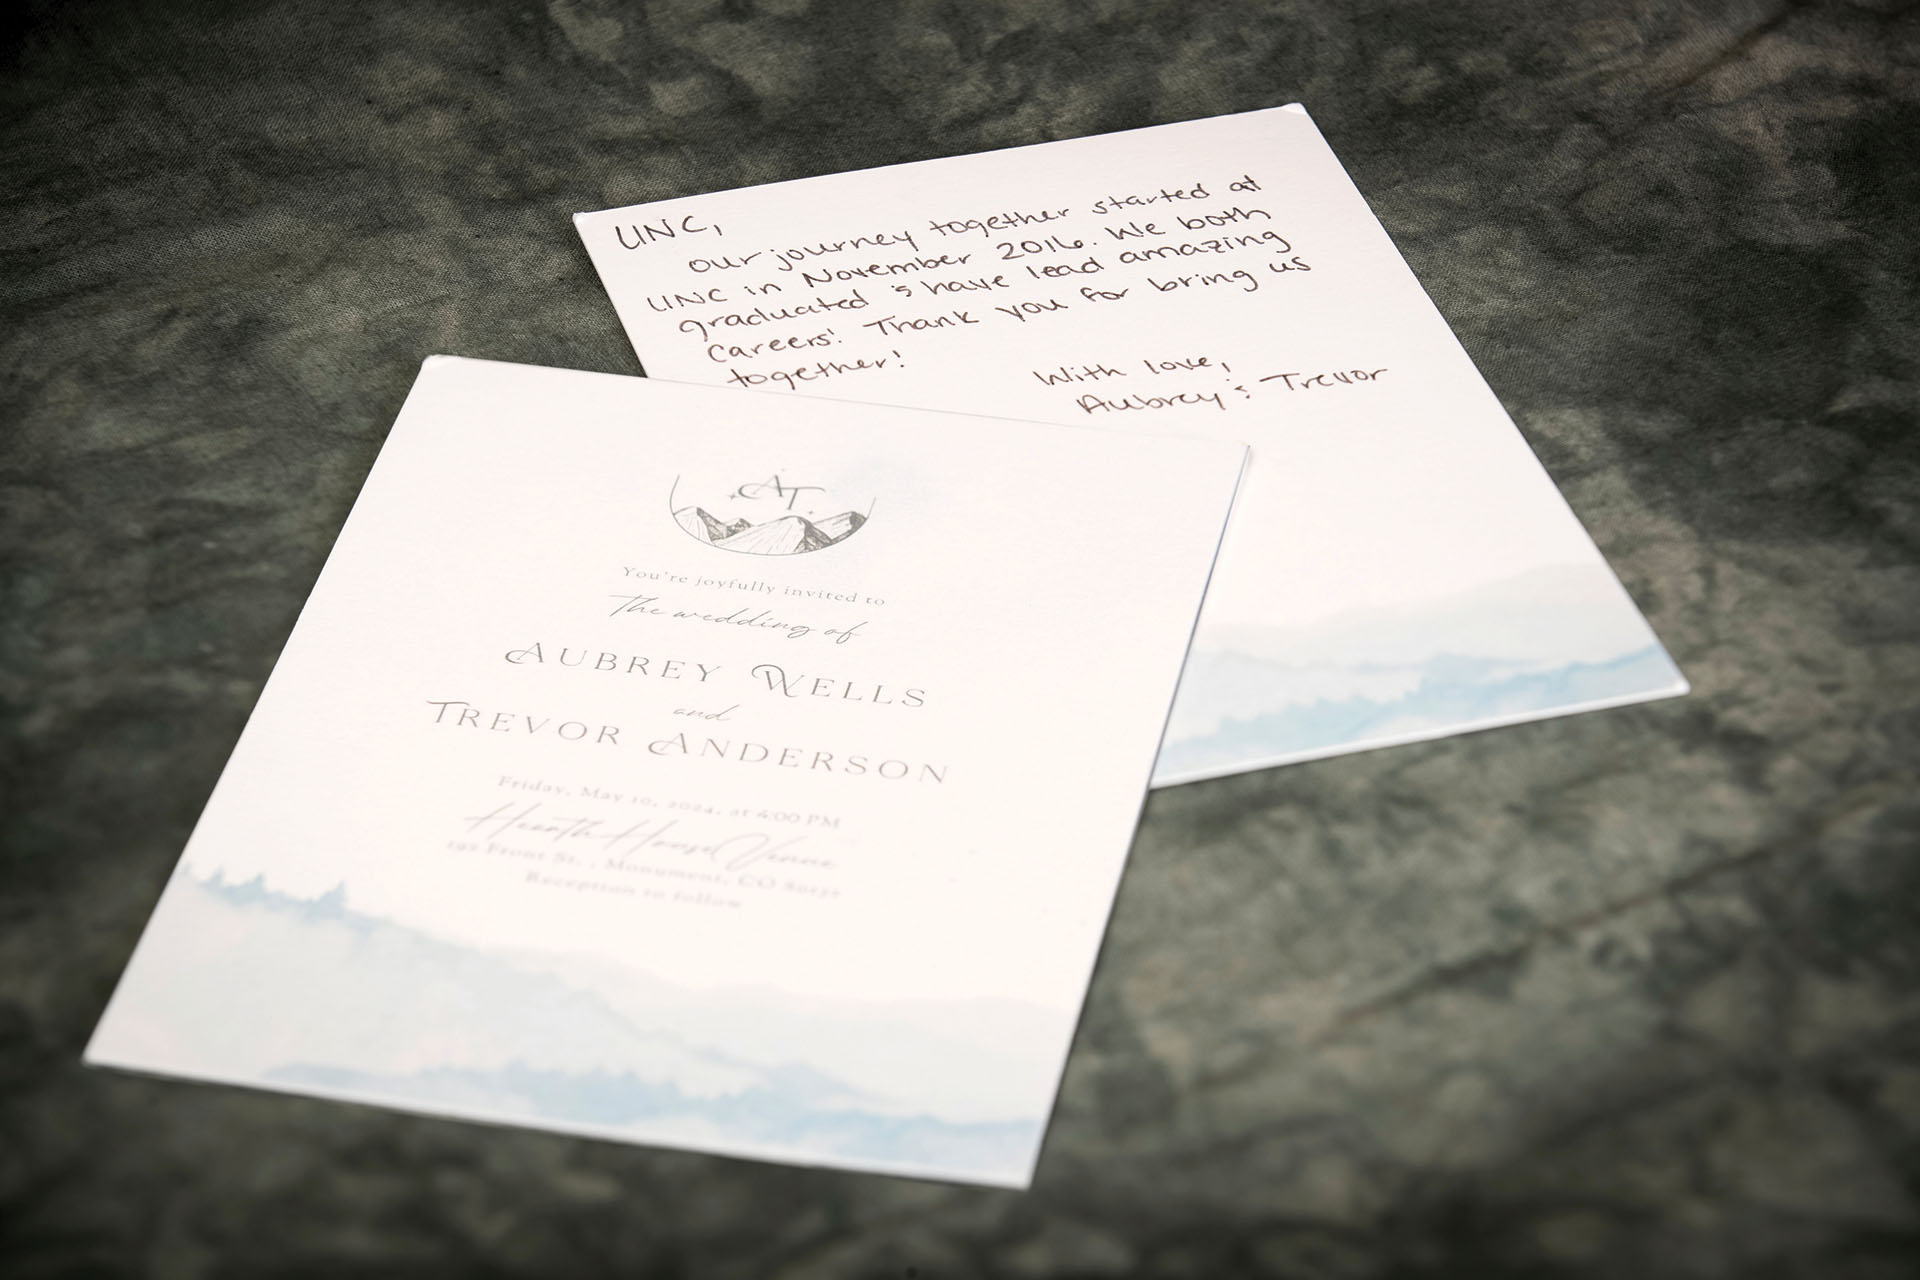 Wedding invitation and letter from Aubrey Wells and Trevor Anderson.